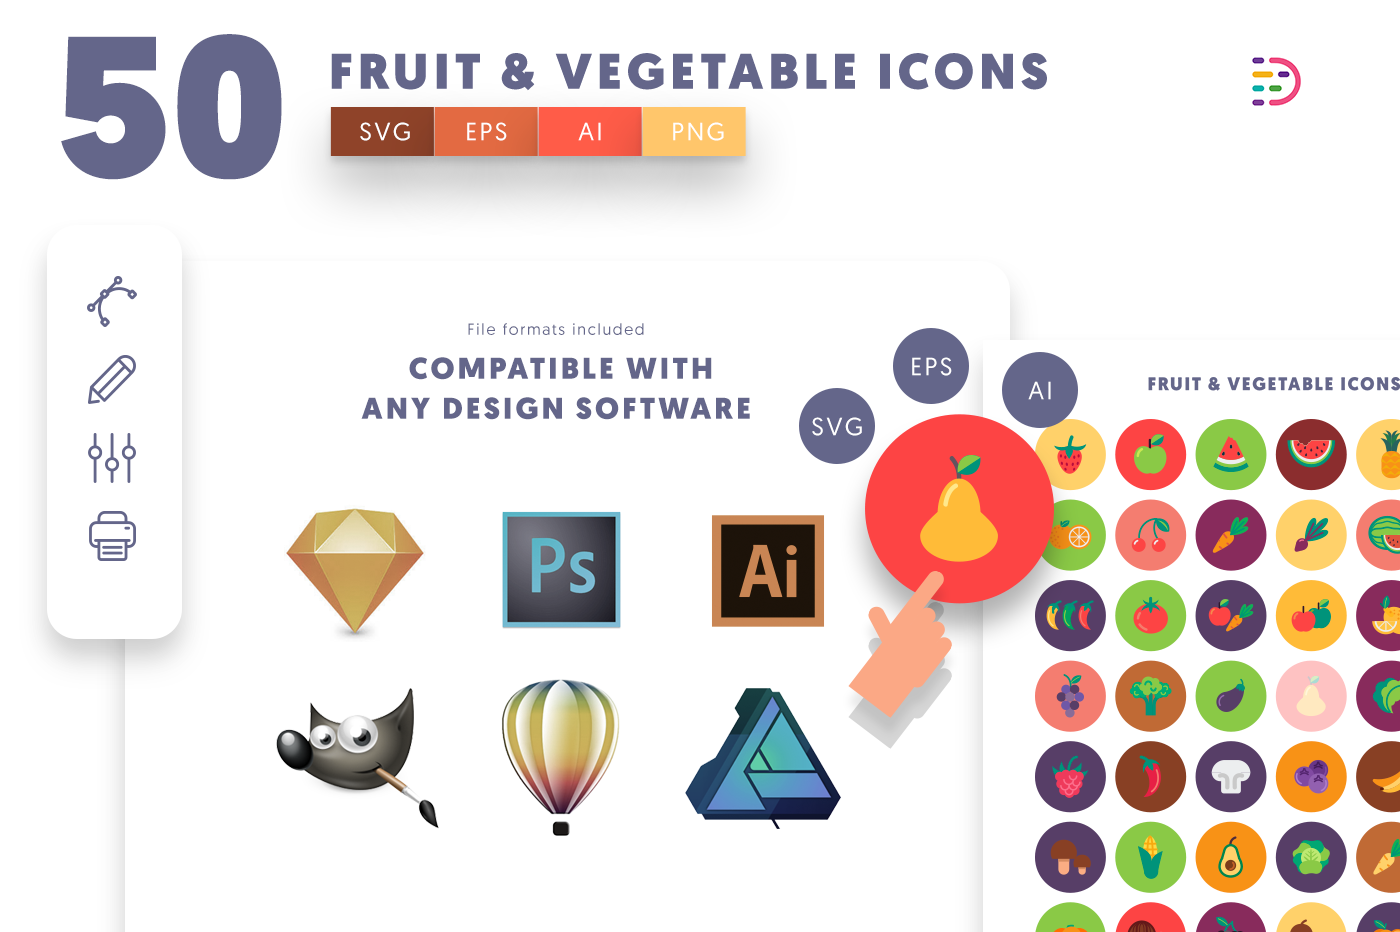 Compatible 50 Fruits & Vegetable Icons pack